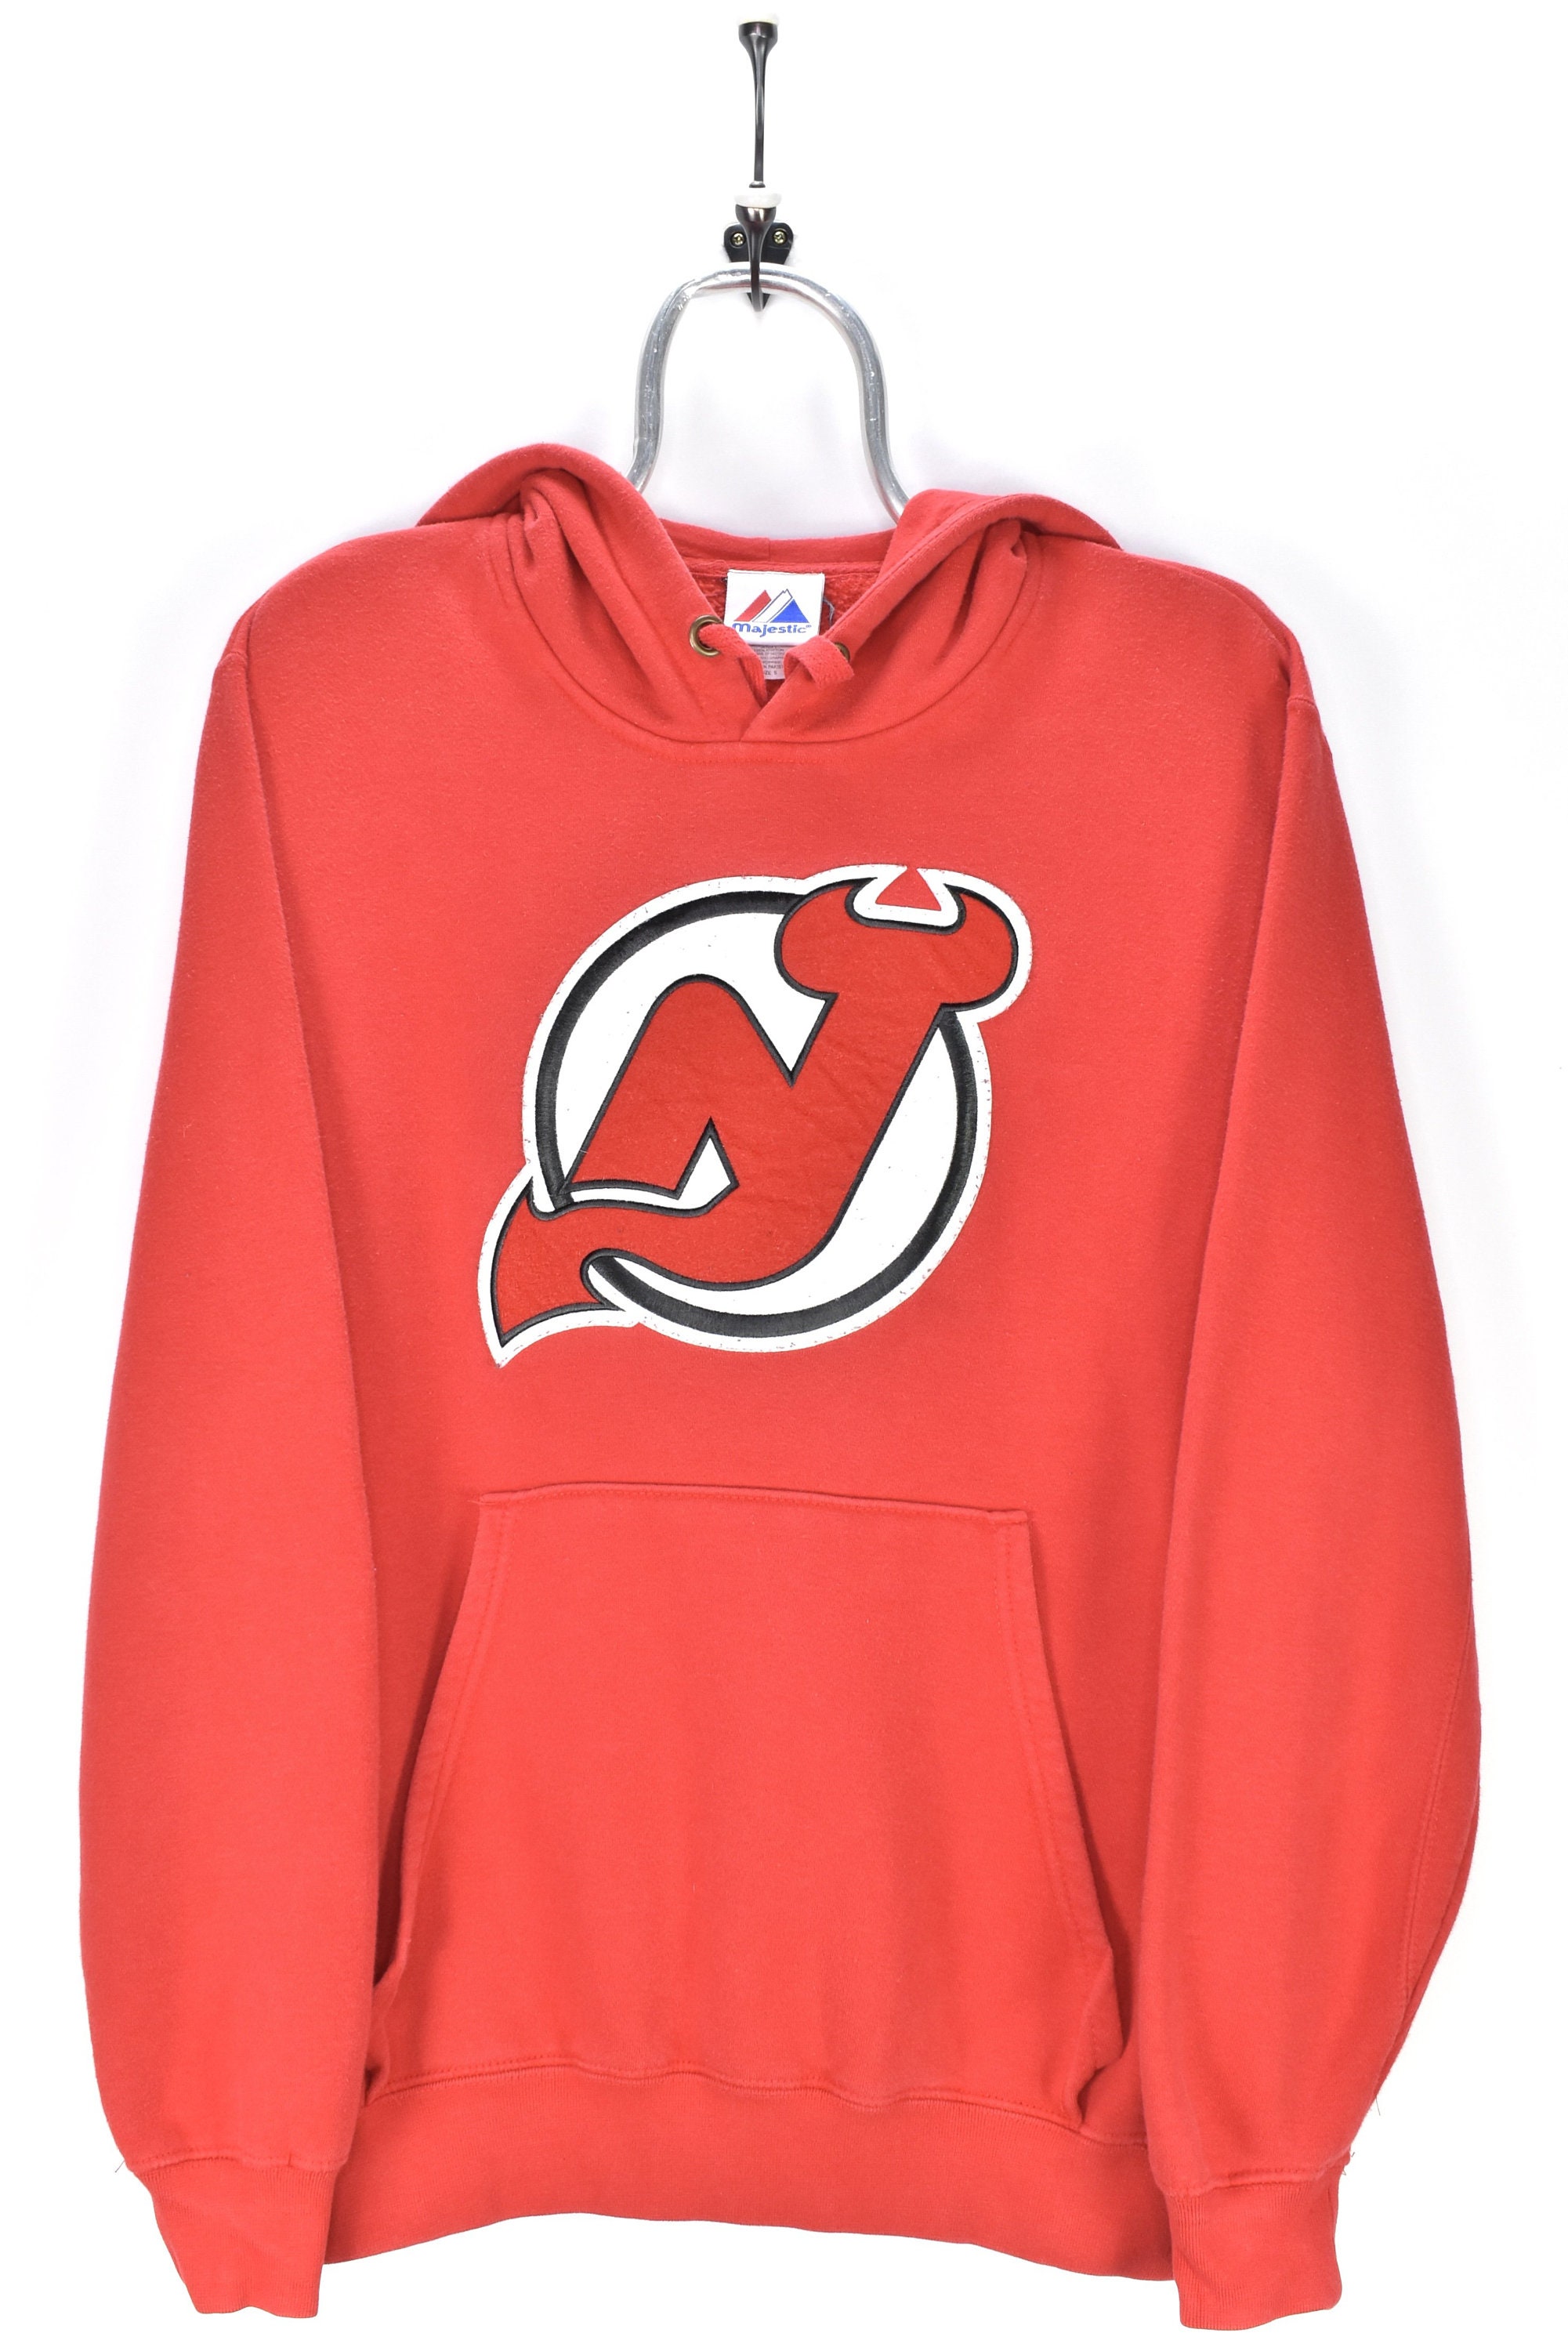 Personalized Vintage NHL New Jersey Devils Throwback Jersey White 3D Hoodie